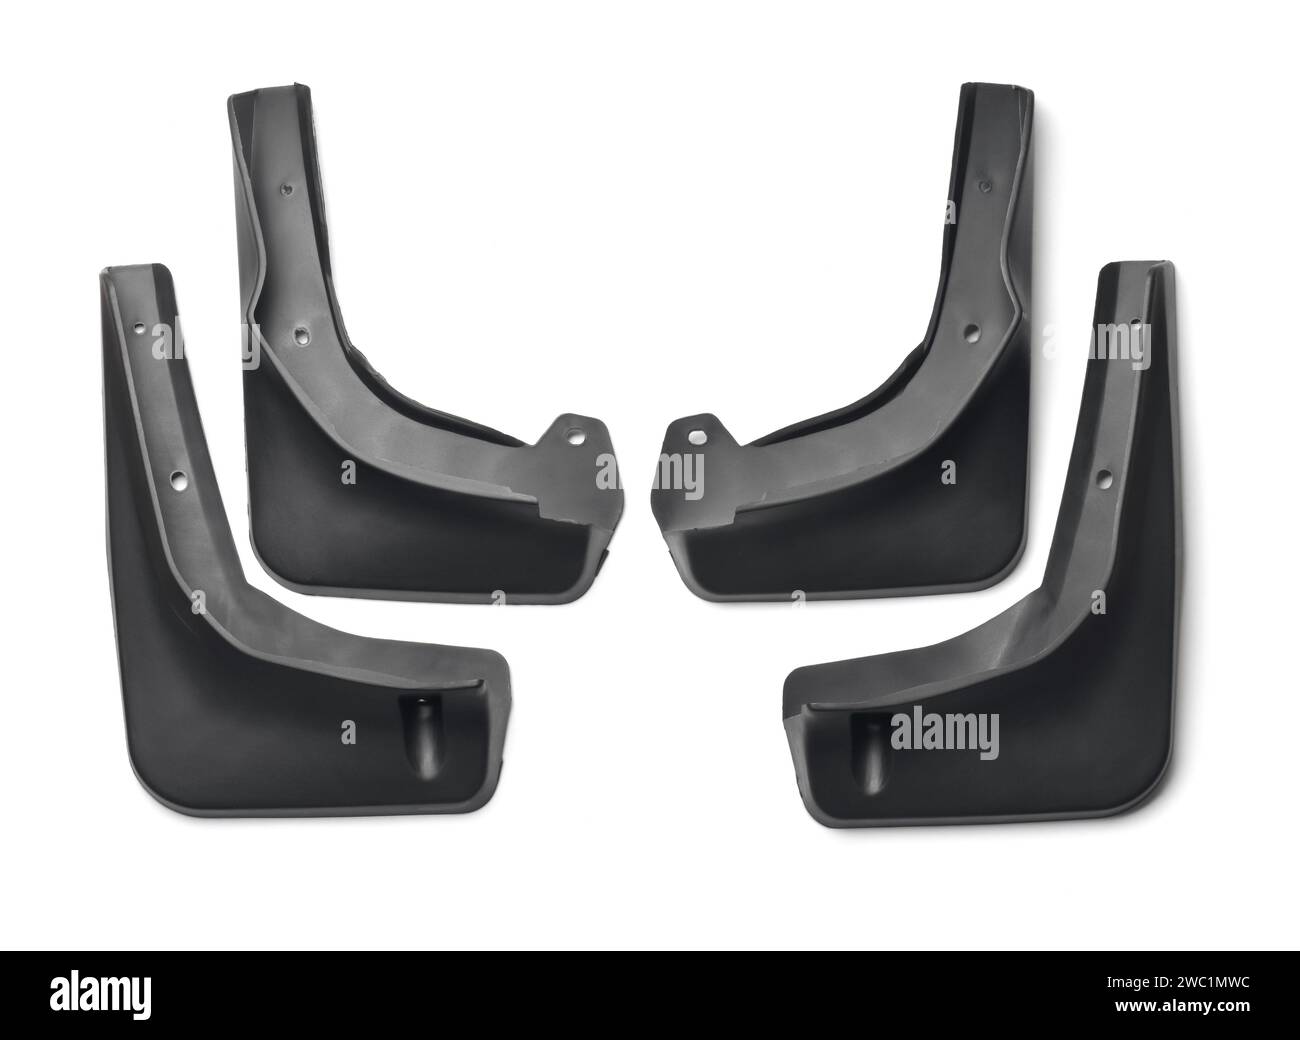 https://c8.alamy.com/comp/2WC1MWC/top-view-of-four-new-black-car-mudguard-set-isolated-on-white-2WC1MWC.jpg